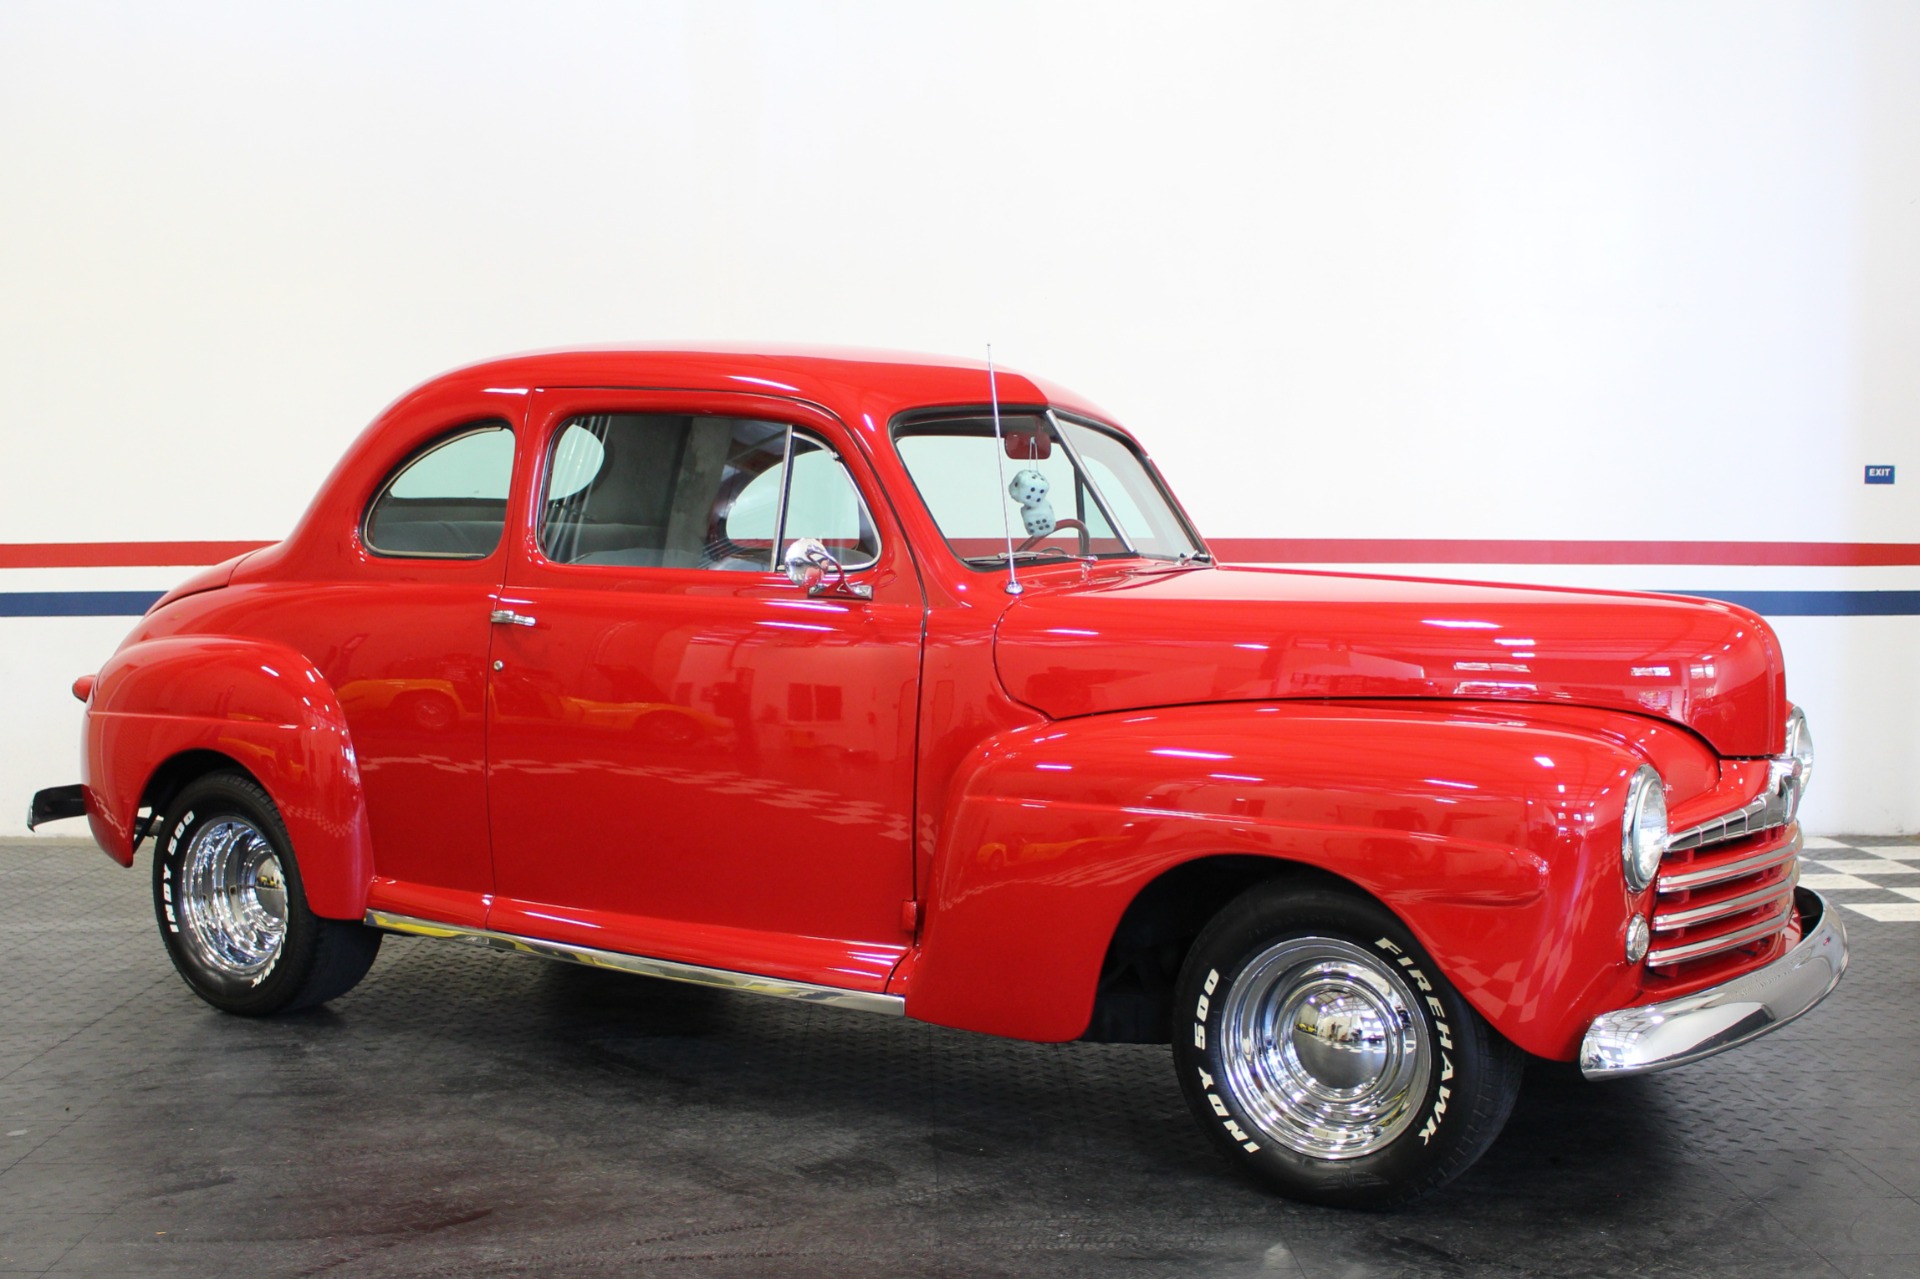 Used-1947-Ford-Deluxe-Tudor